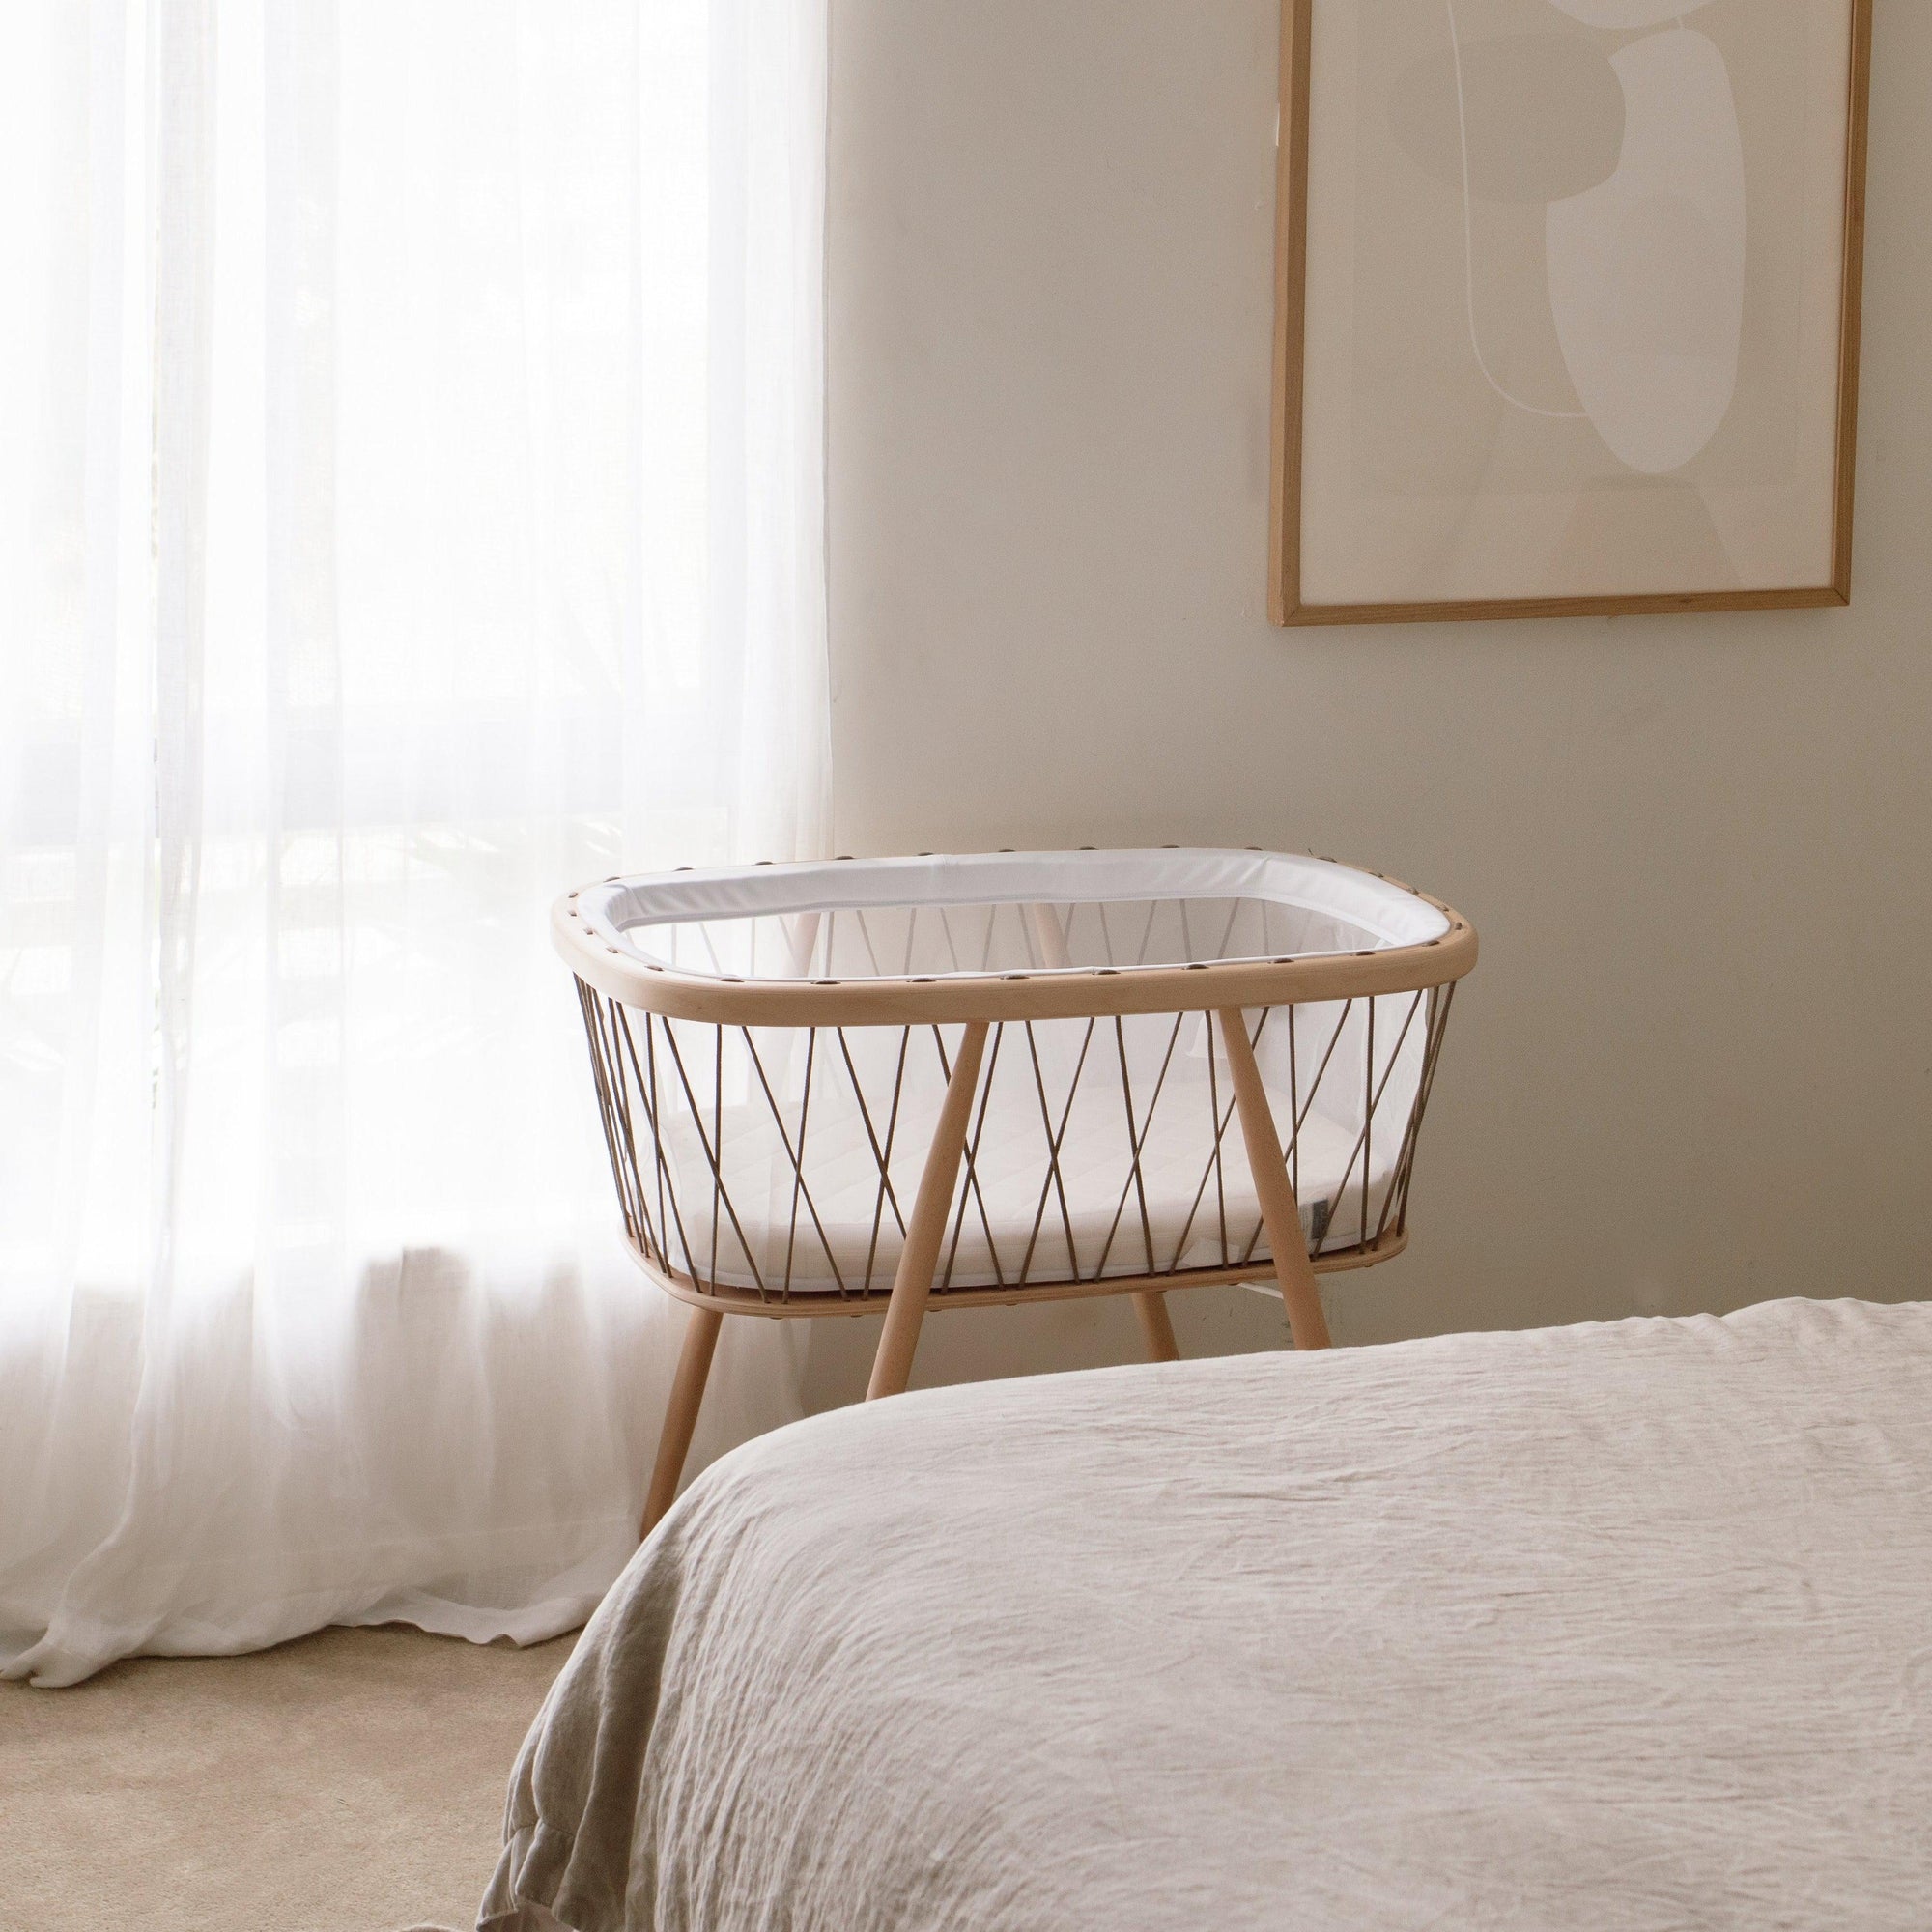 A KUMI bassinet in hazelnut colour by Charlie Crane next to a bed.